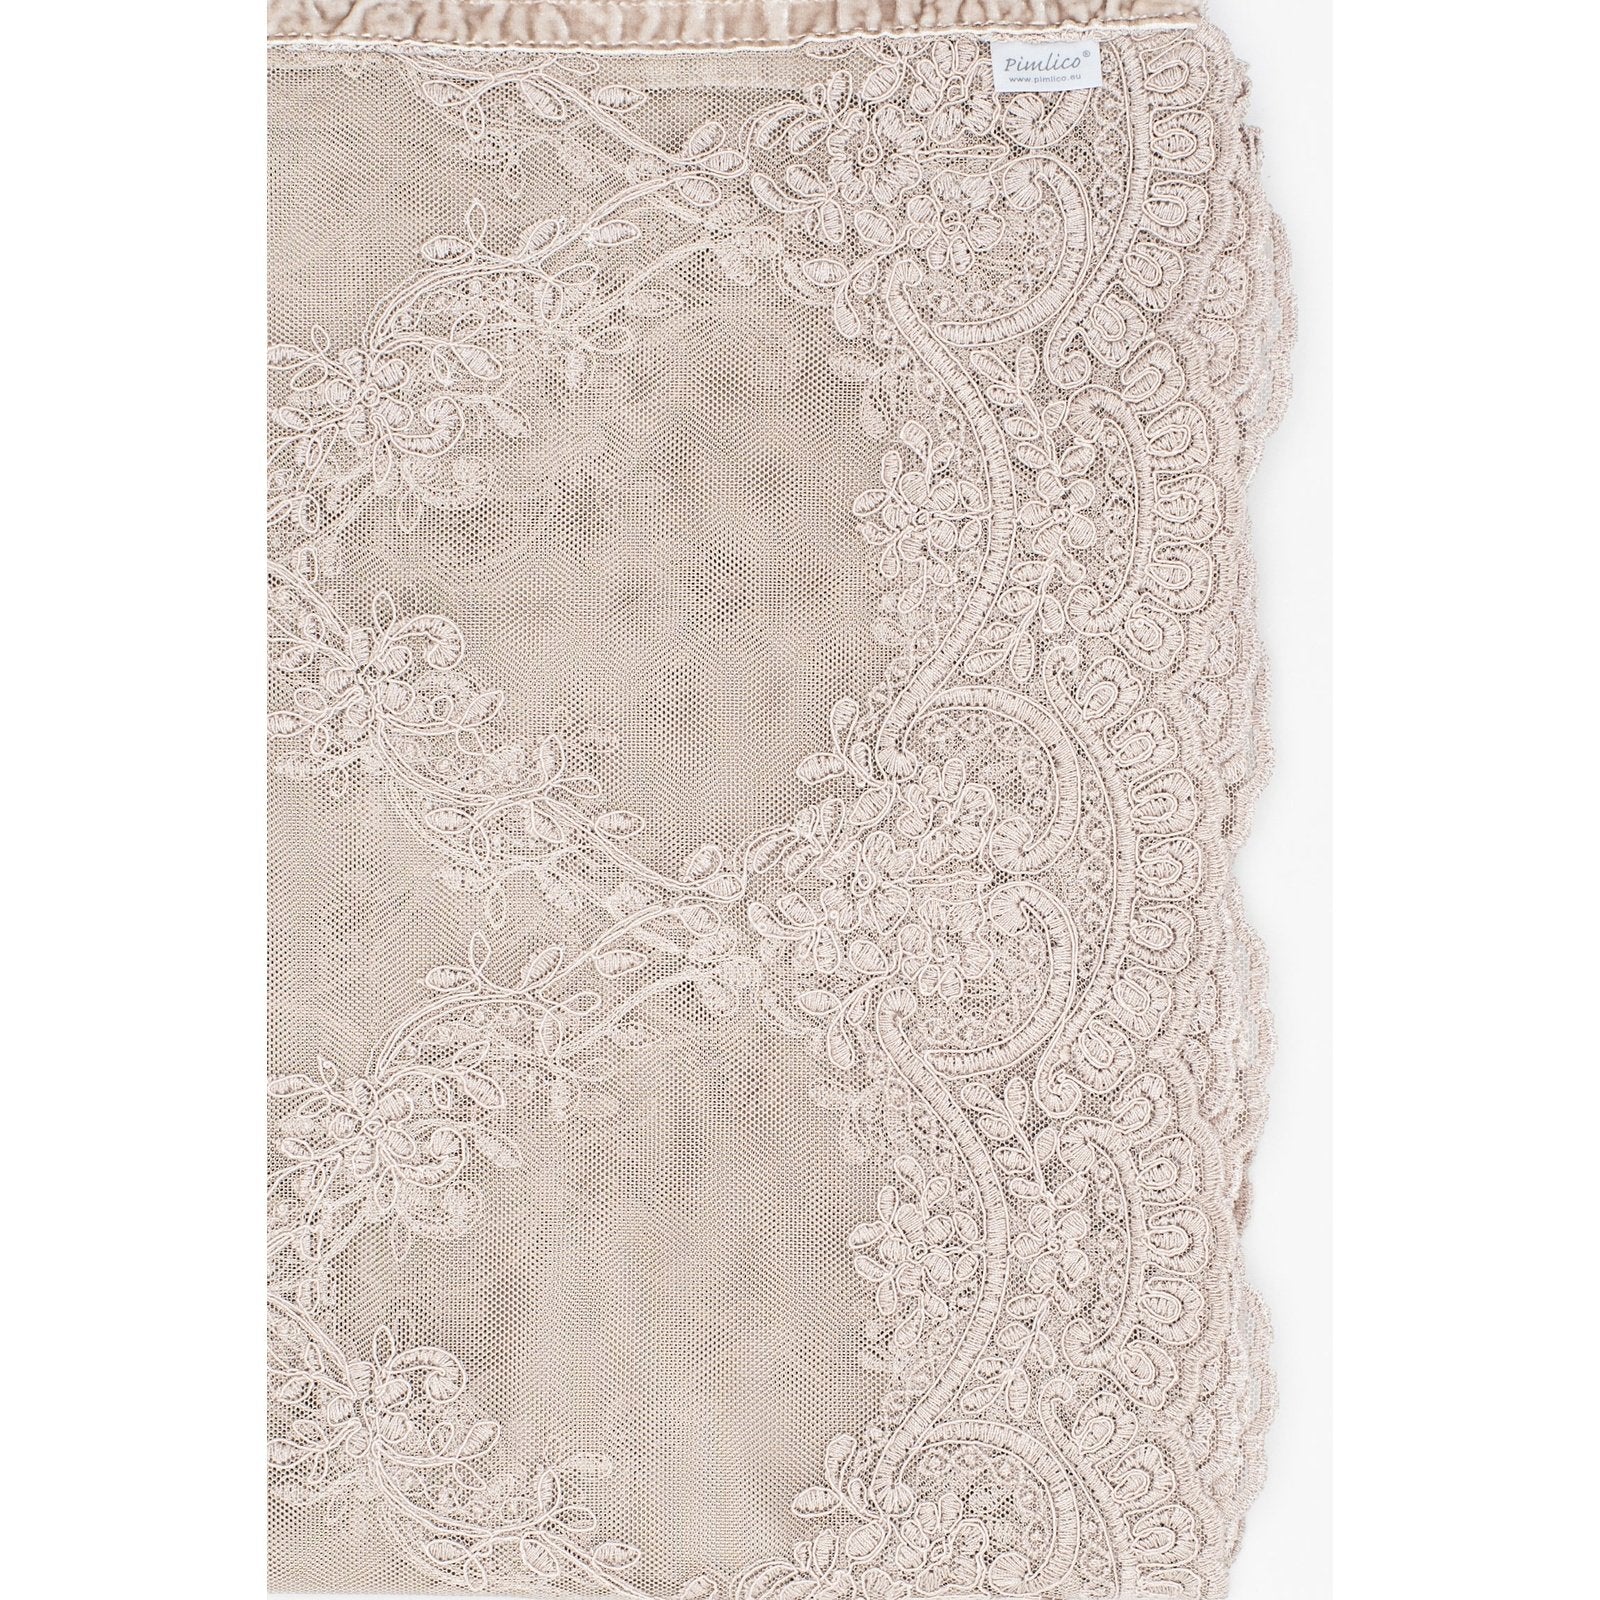 This luxurious embroidered lace tablecloth will transform your table in an instant! The beautiful and delicate embroidery make this tablecloth stand out. Despite its delicate look, this tablecloth can be machine washed without problems. 